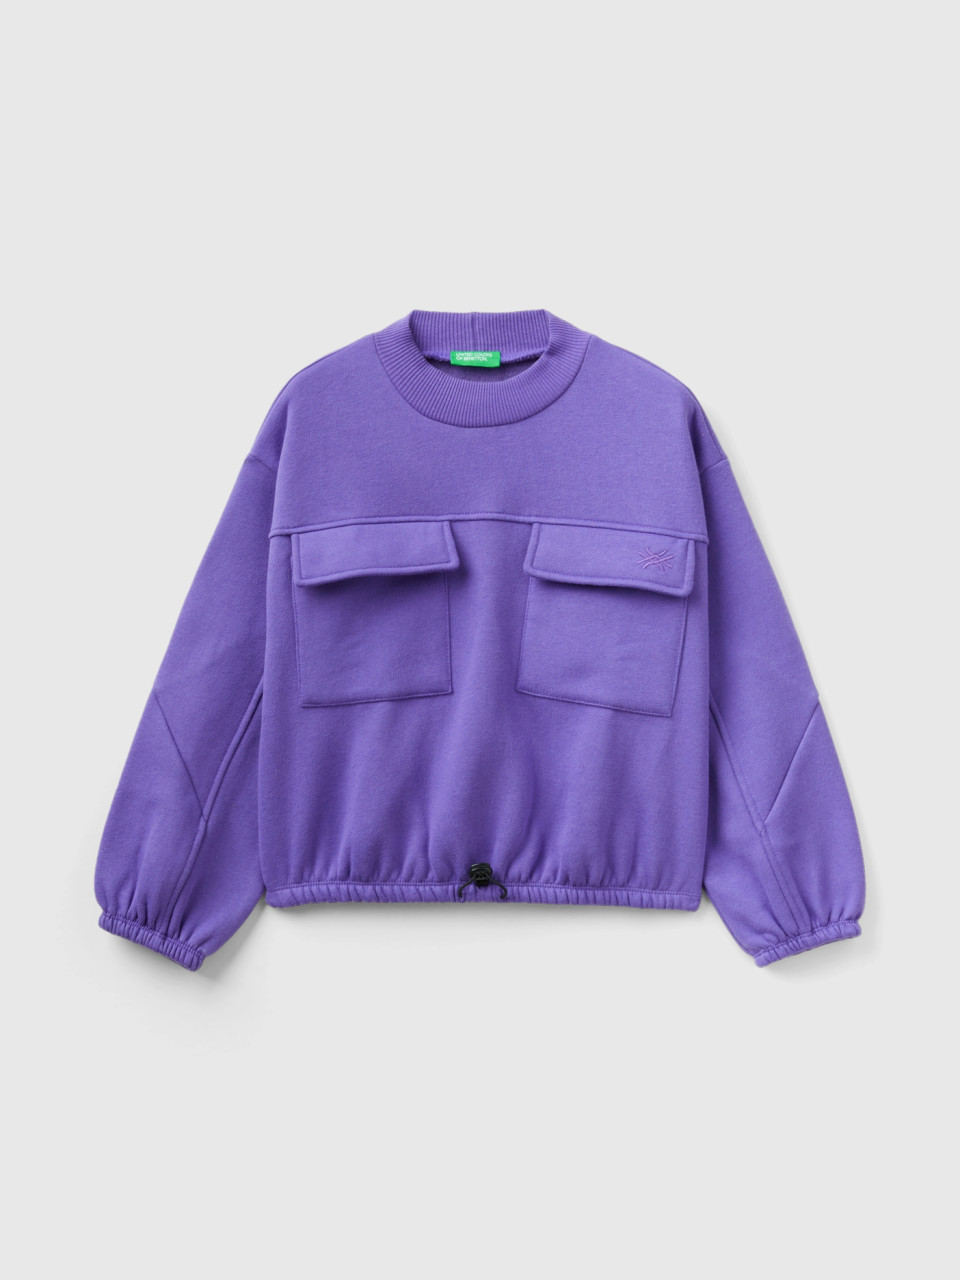 Benetton, Boxy Fit Sweatshirt With Pockets, Violet, Kids